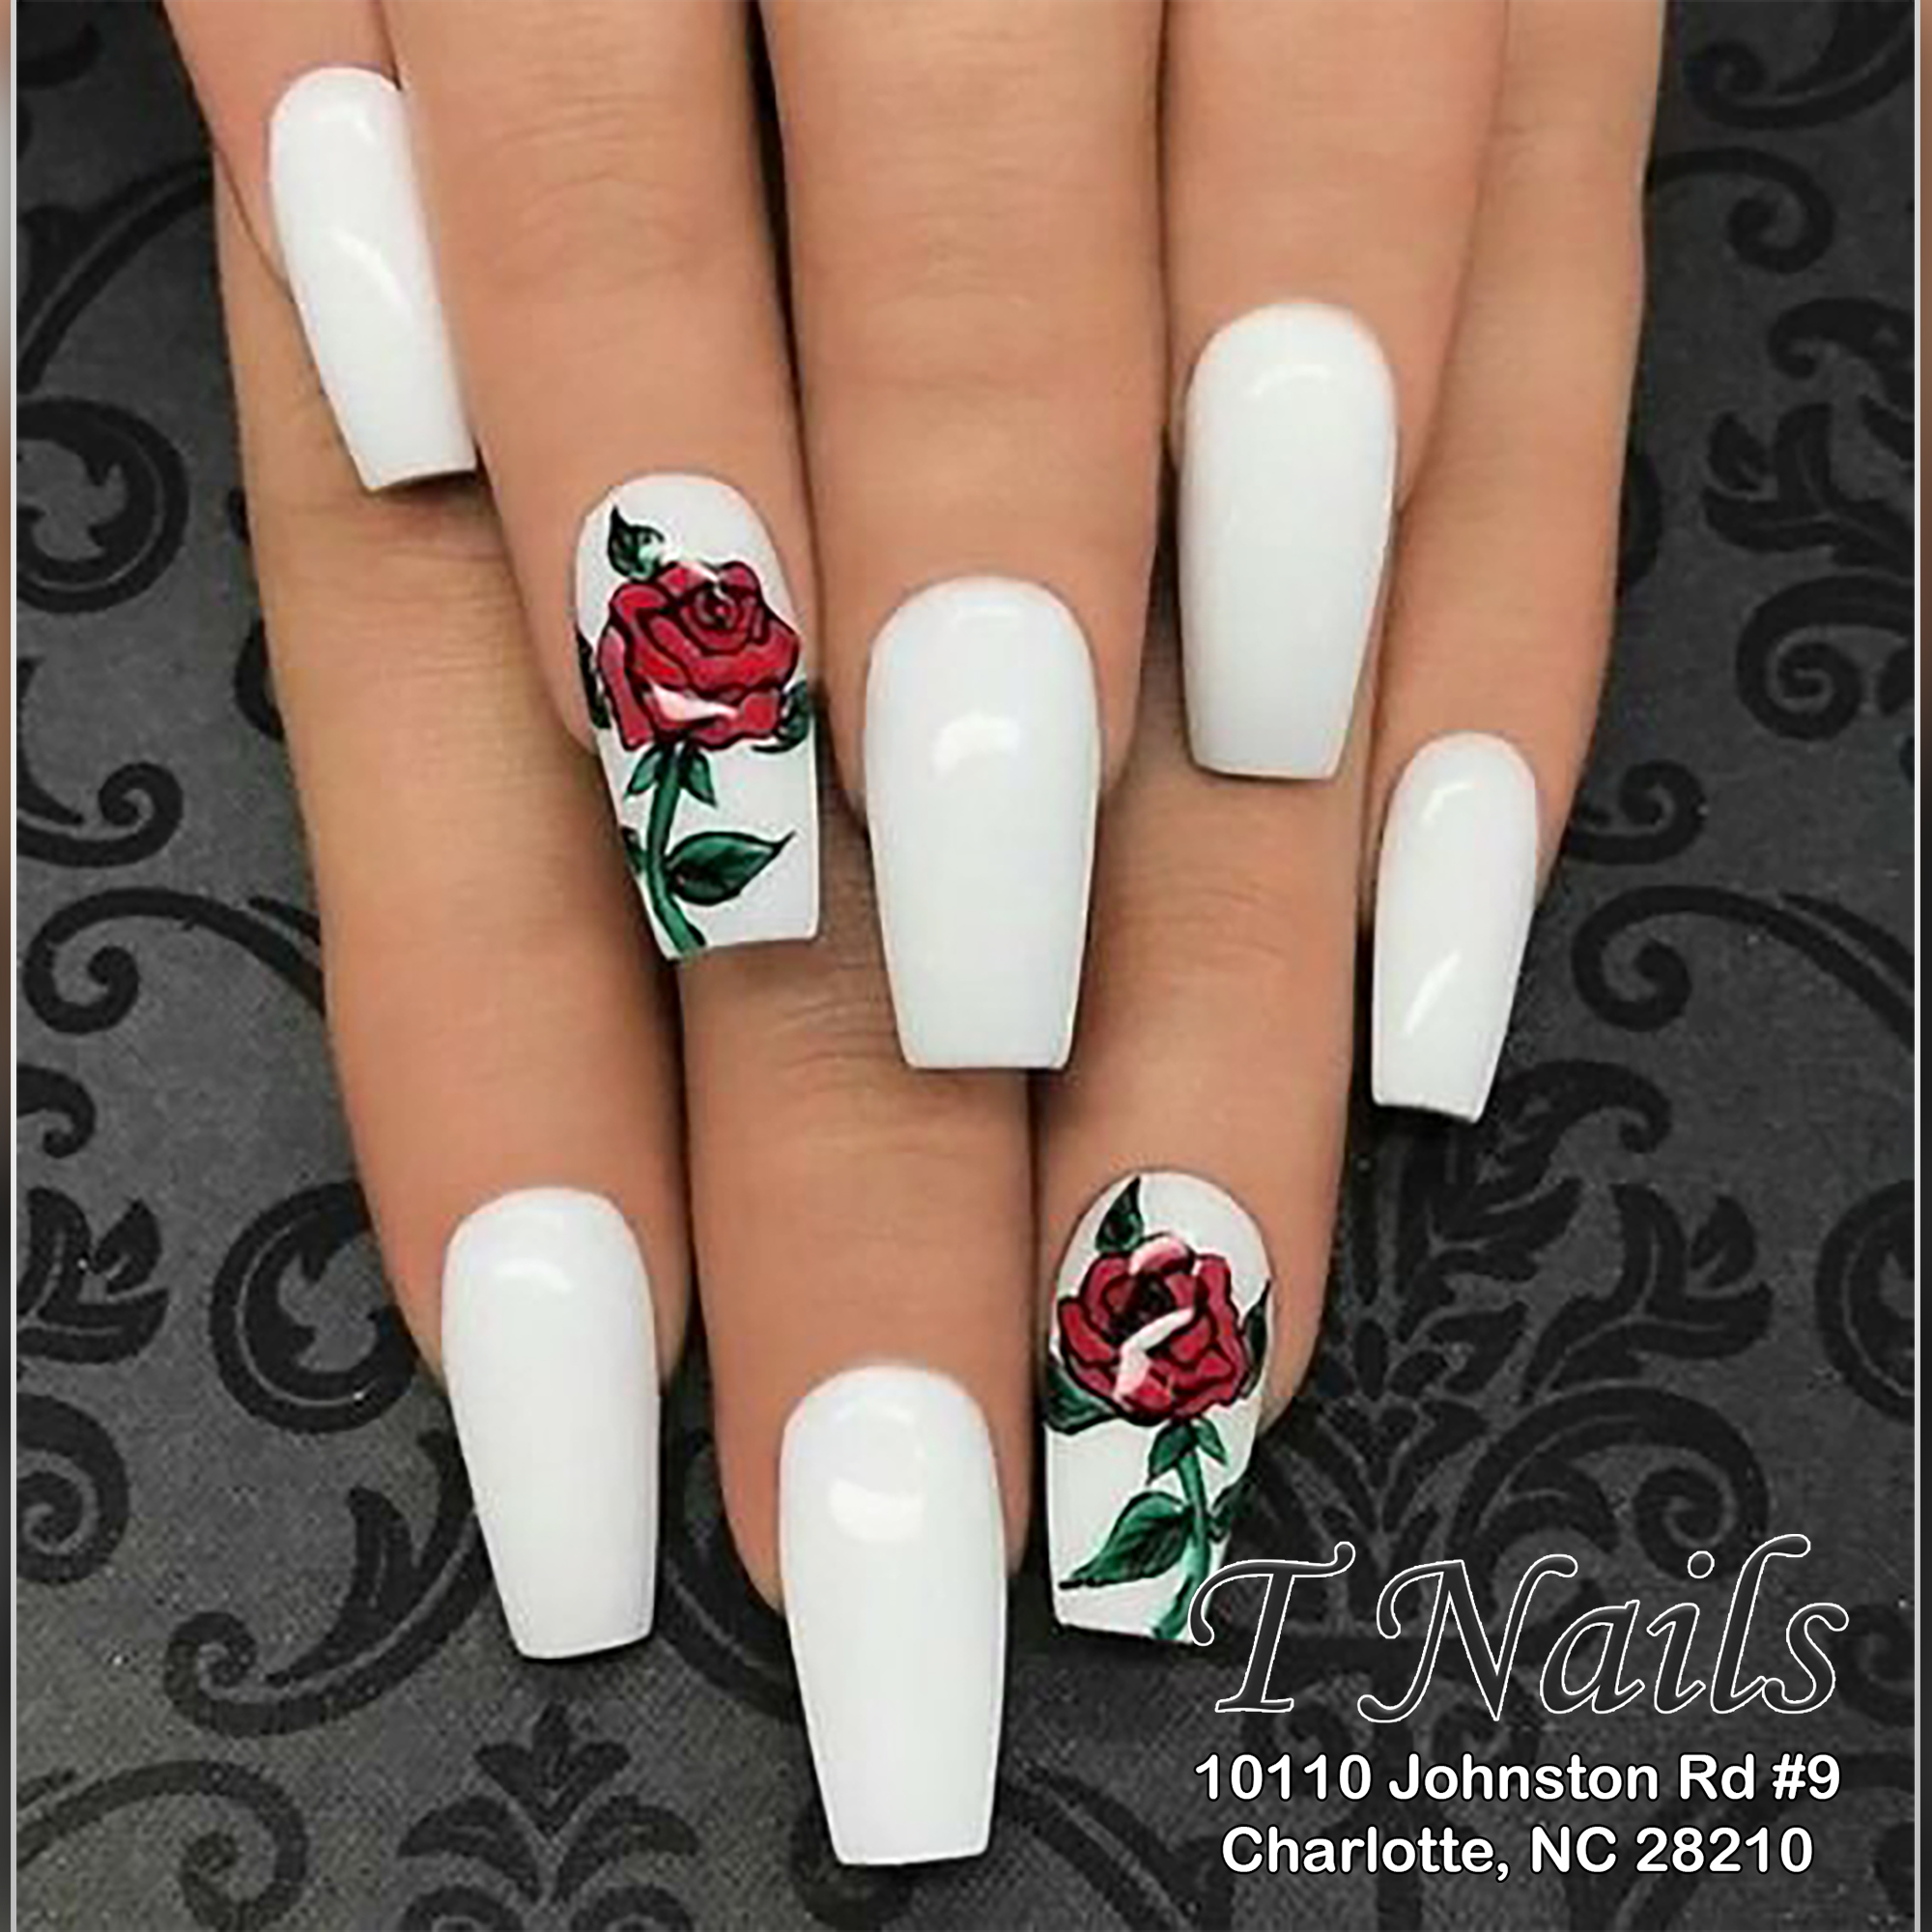 T Nails – The best nail salon in Charlotte, NC 28210